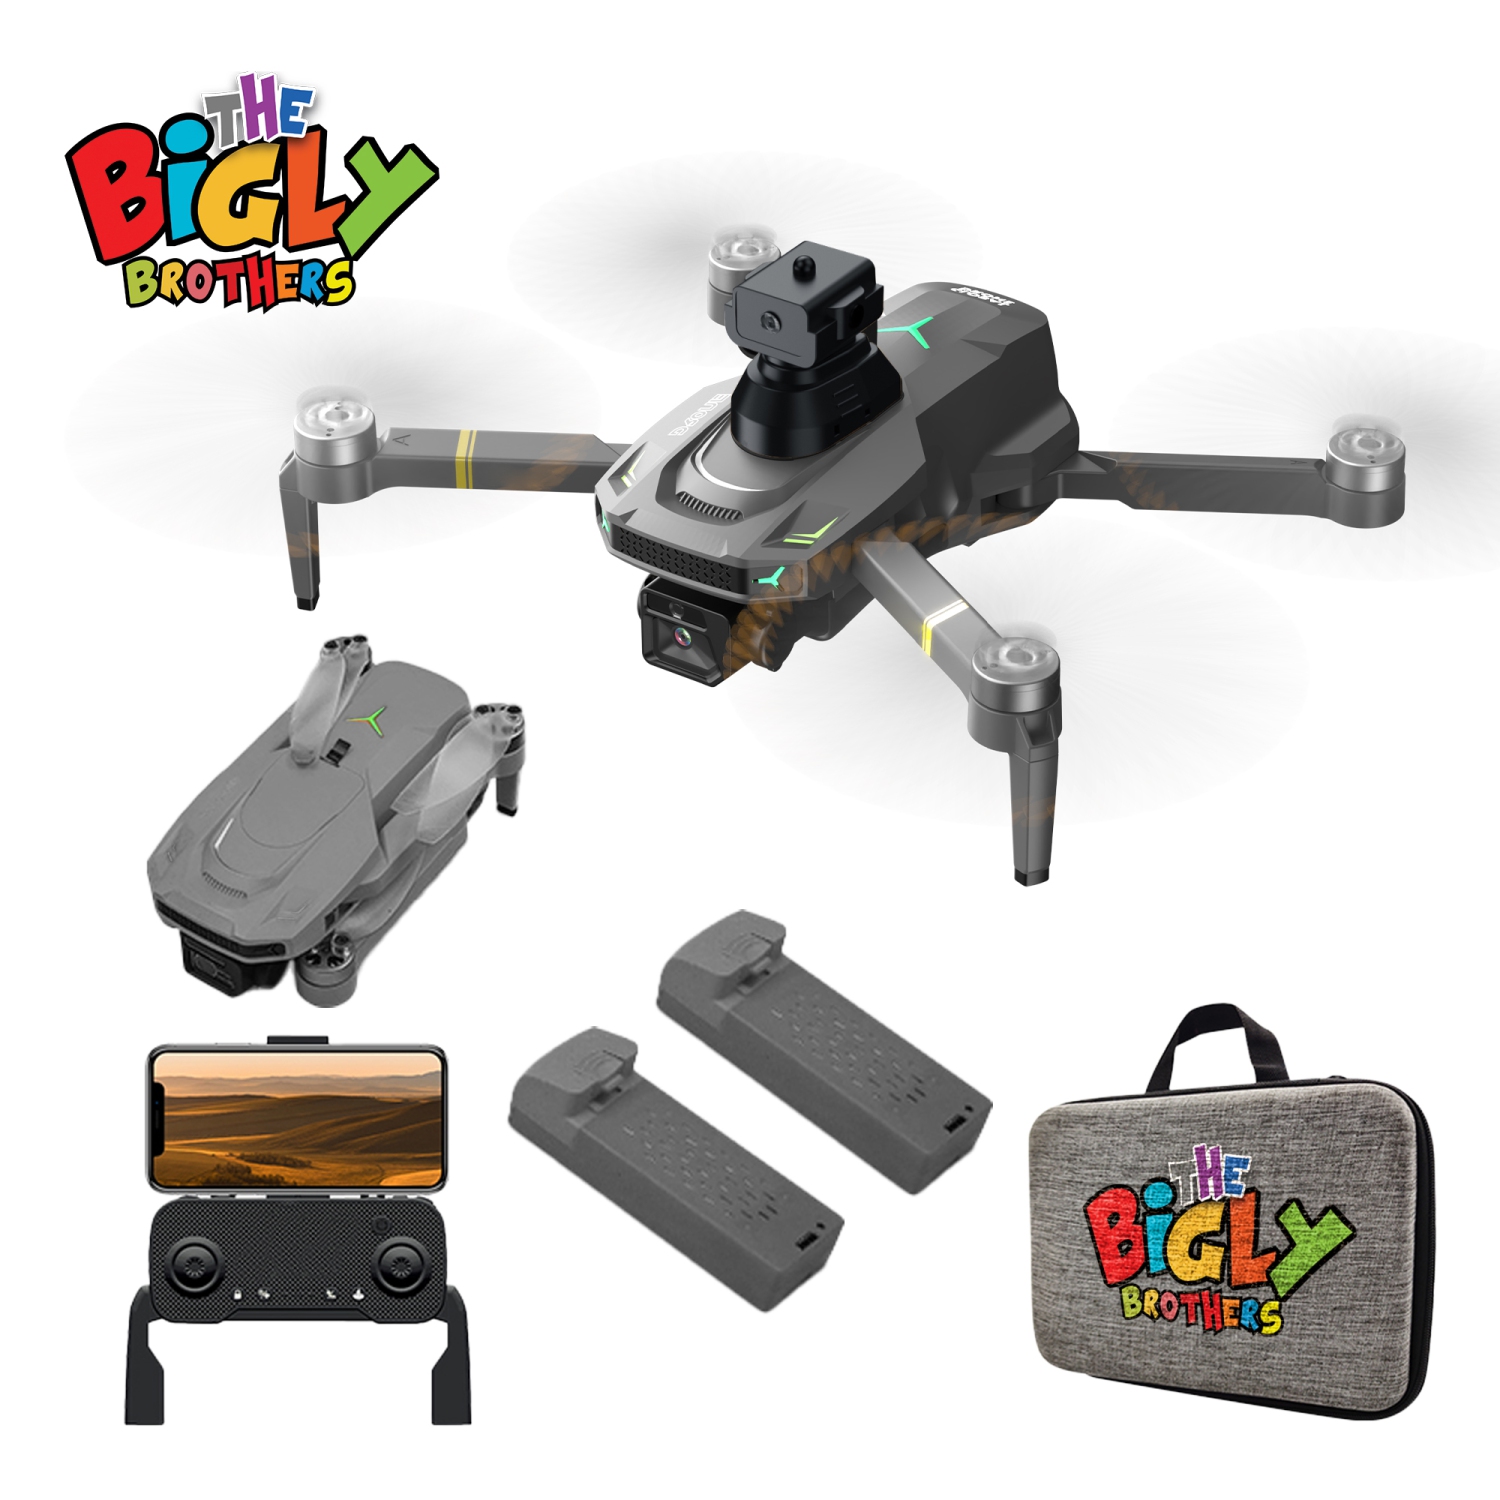 The Bigly Brothers E58 X Pro LITE: 2K Drone with Camera plus Carrying Case and 2 Batteries. Ready to fly, No Assembly Required.